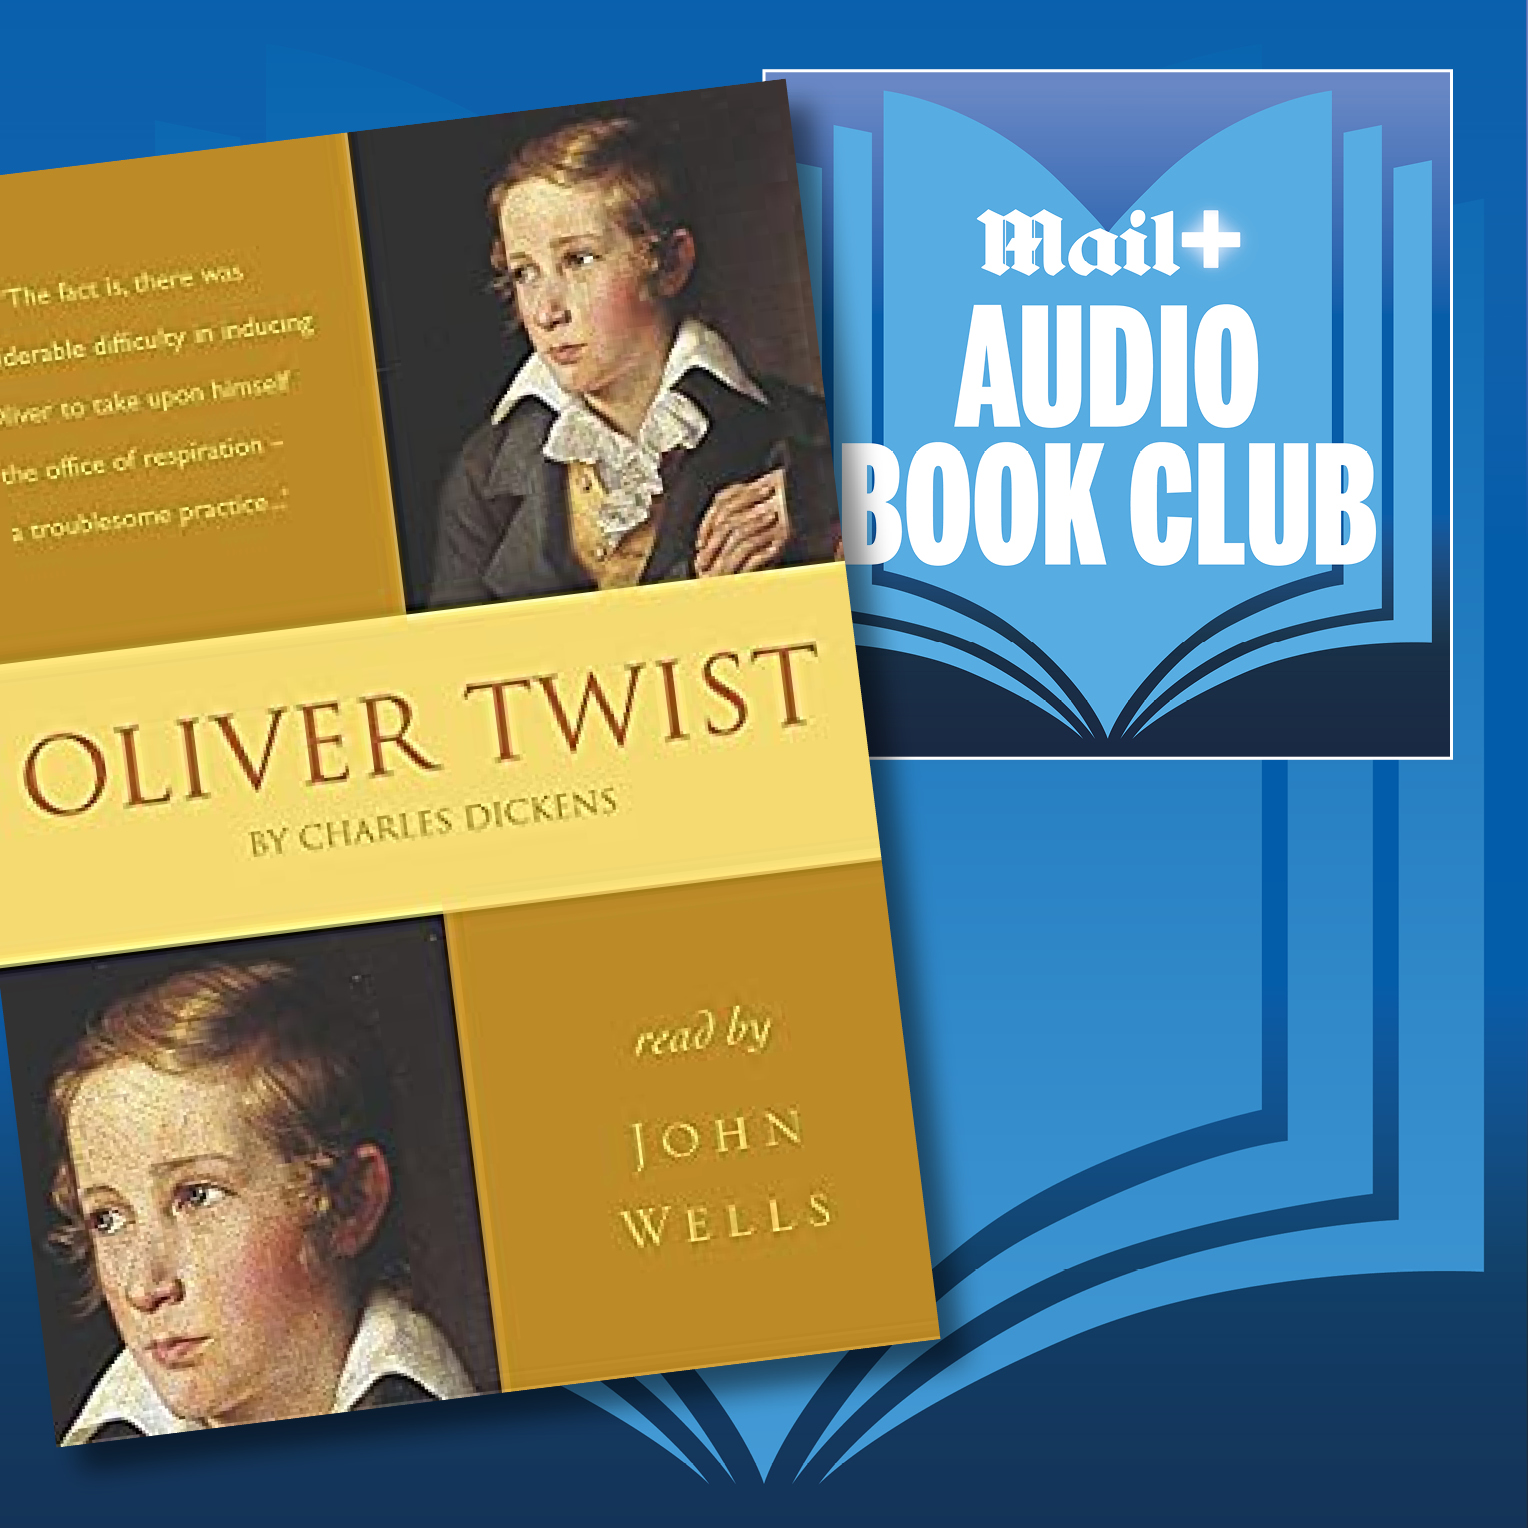 Oliver Twist by Charles Dickens, from Mail+ Audio Book Club